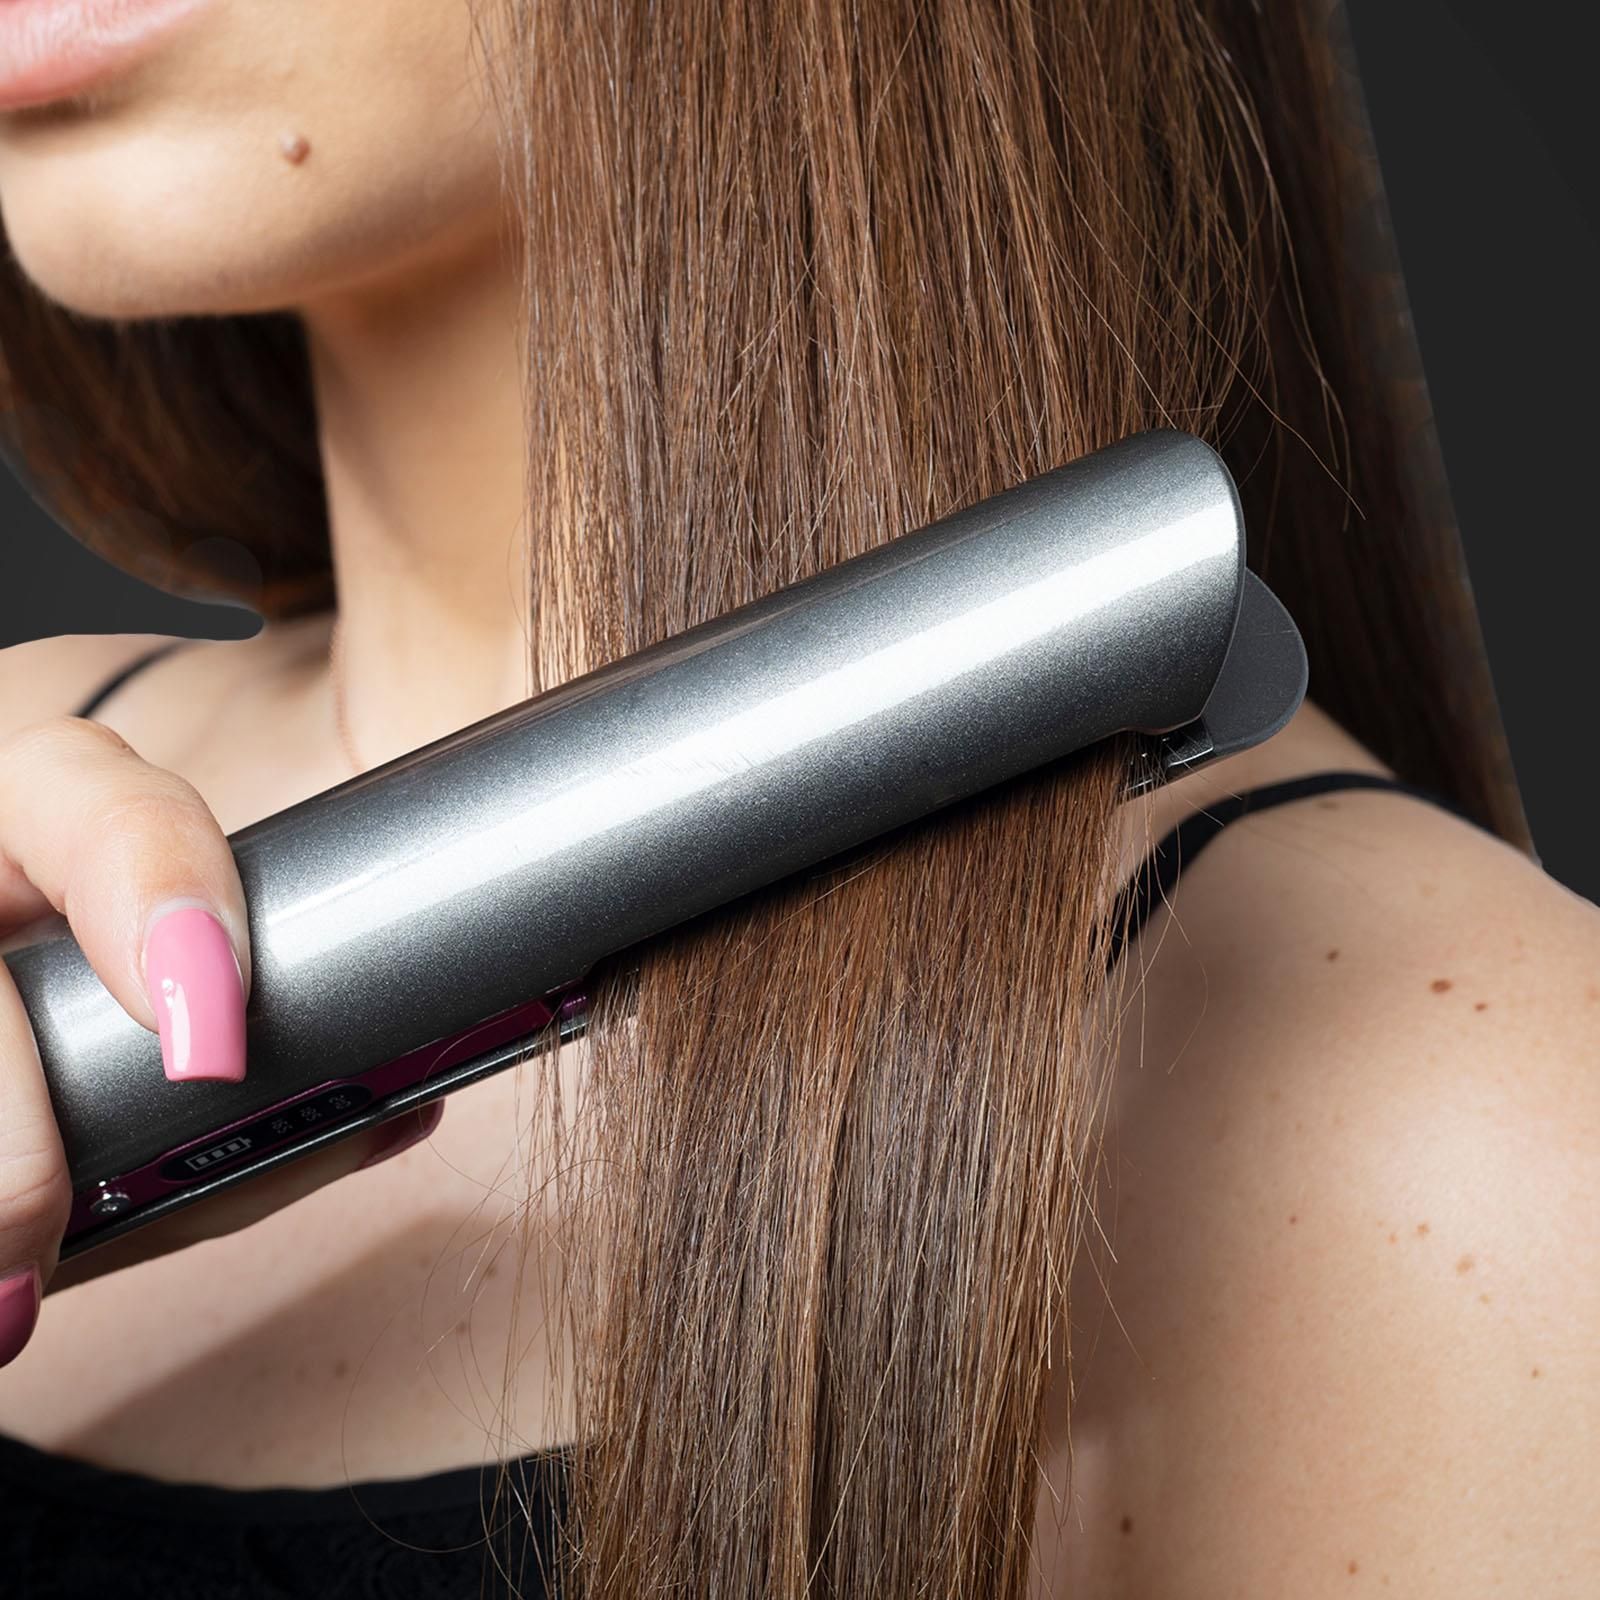 Your curling iron and flat iron in one handy tool, the envie cordless rechargeable 2 in 1 hair straightener works effortlessly on fine, thick, long, medium and short hair.  The ceramic coated plate with its floating heating plate ensures you never pull on your hair, reducing heat damage and locking in the moisture, creating a shiny, healthy finish with every style.

Key Features:
2 in 1 Hair Straightener and Curler
Rapid Heating
3 Temperature Settings: 165°C, 185°C, 210°C
Power Level Indicator: 35%, 65%, 100%
Ceramic Coated Plate
Floating Heating Plate
Lockable Handle
30 Minutes Automatic Shutdown
Charging Time: 2.5 Hours
Useage Time: 30 minutes @ 210°C  
Charging Stand and USB Charging Lead included
Travel Storage Bag included